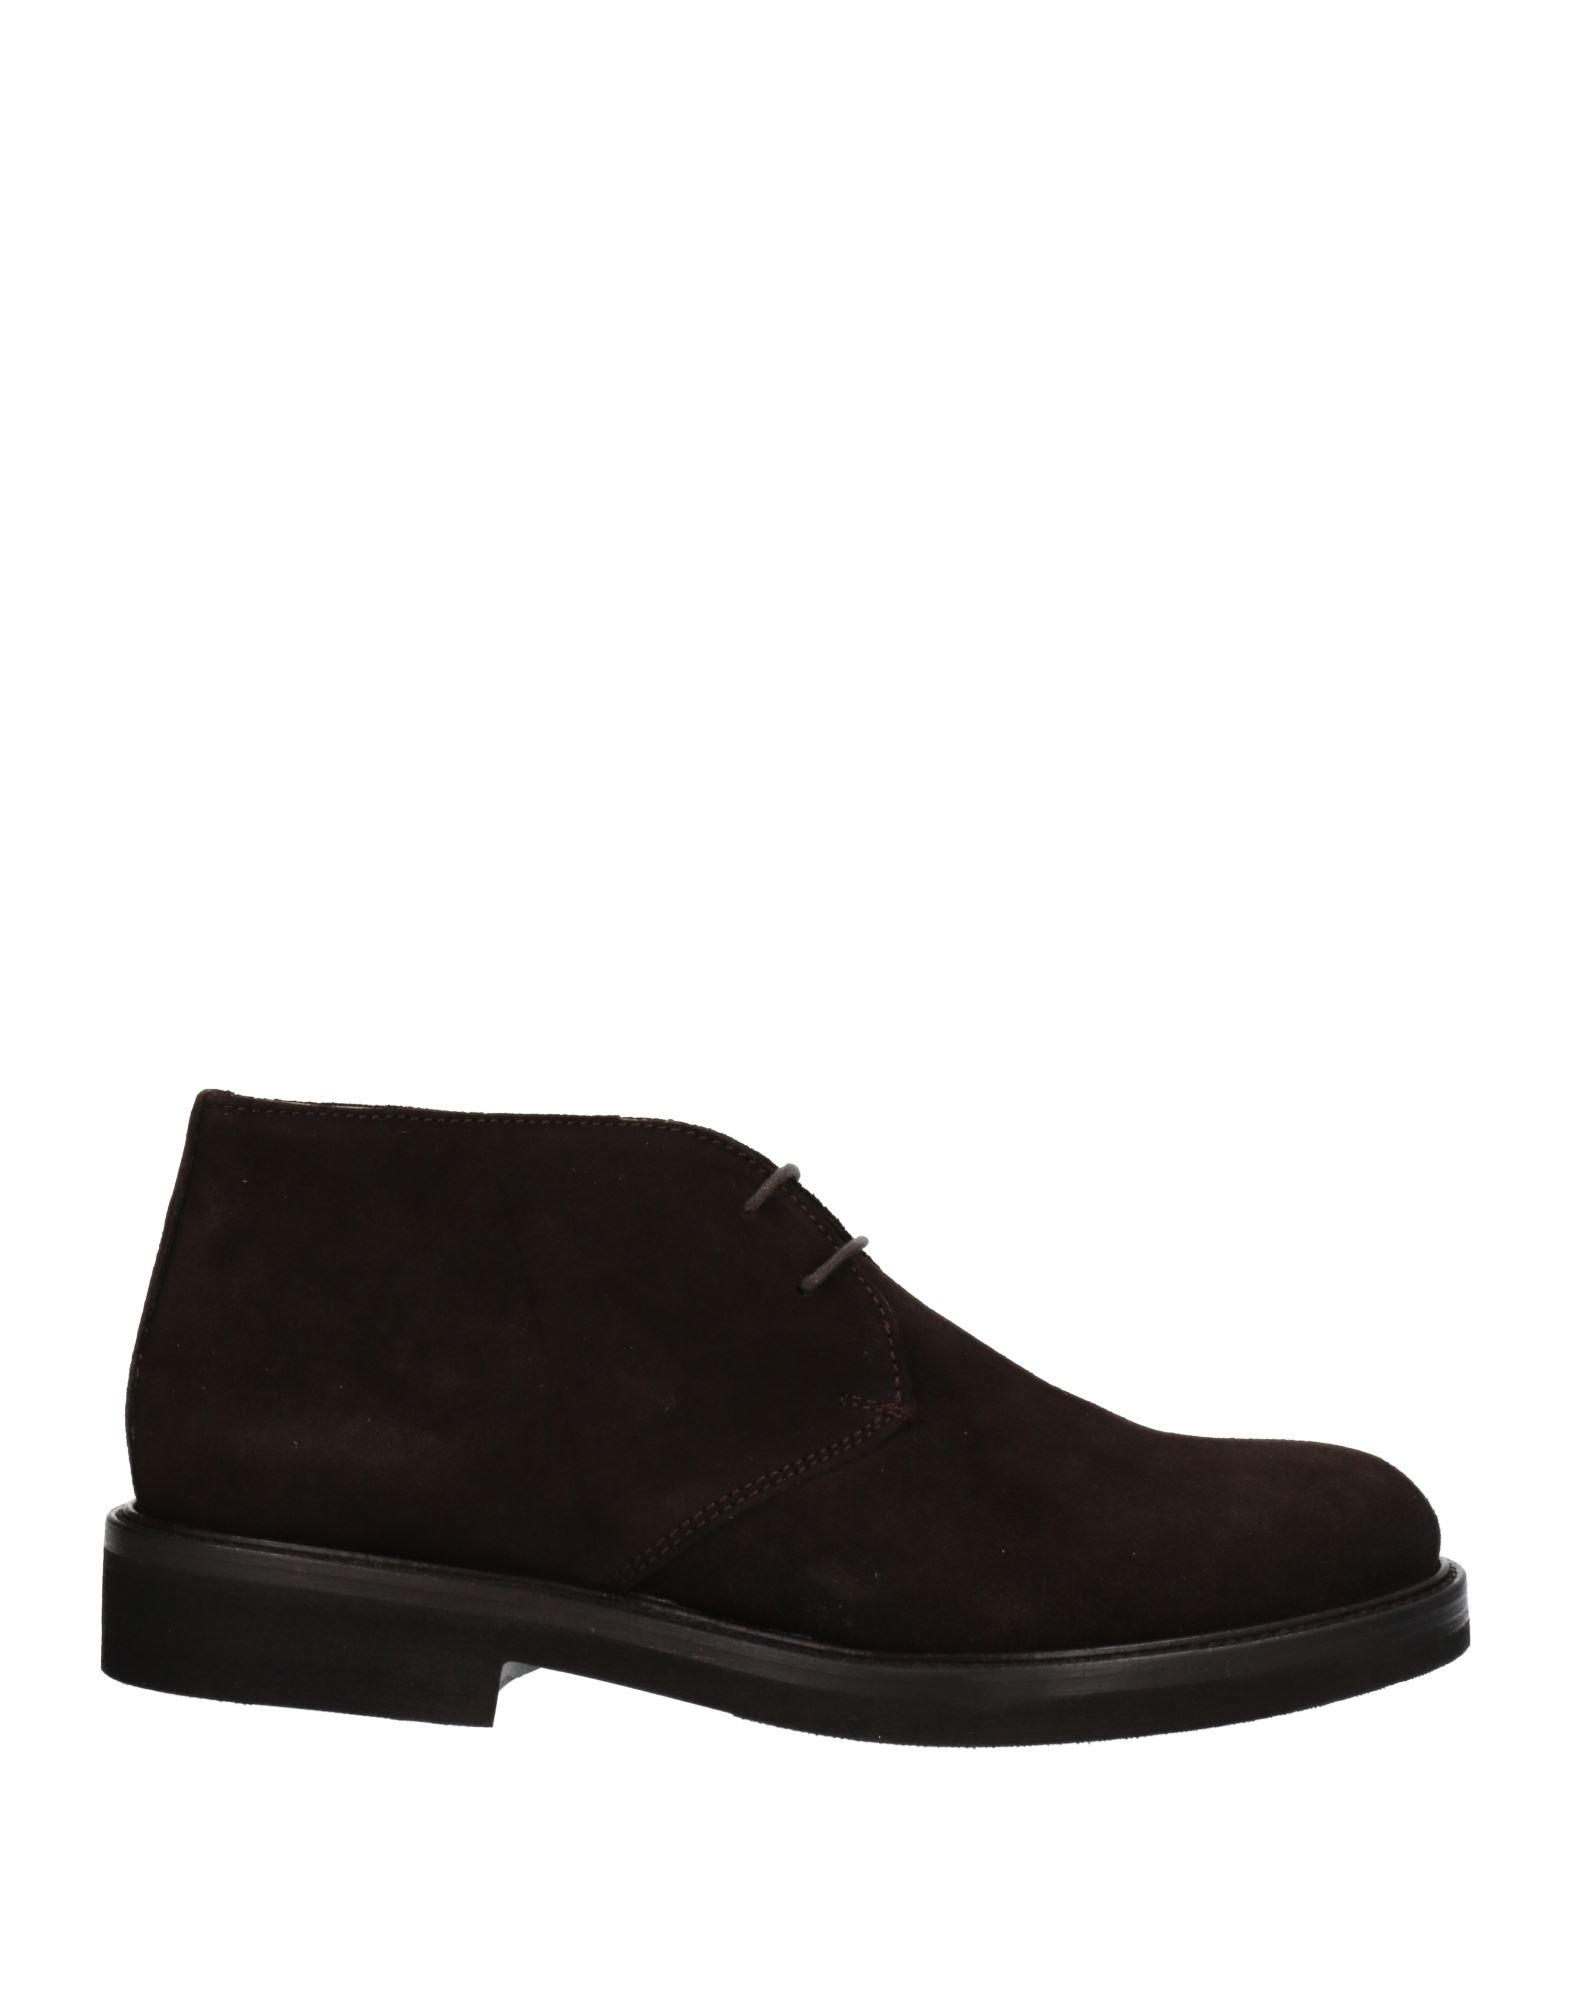 Baldinini Ankle Boots In Brown